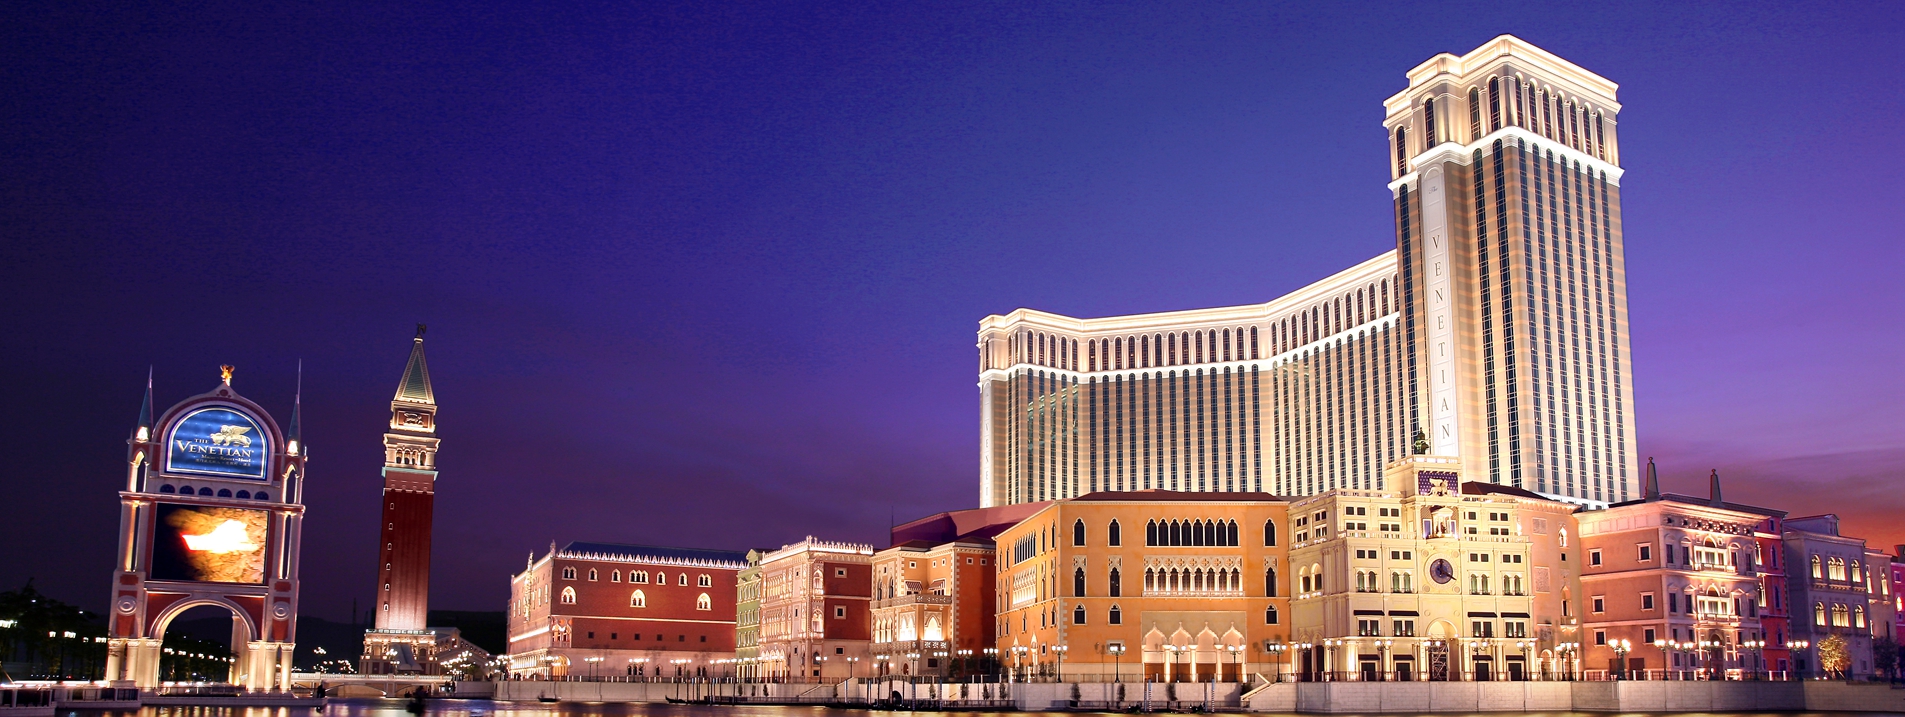 The Venetian Macao resort, operated by Las Vegas Sands Corp